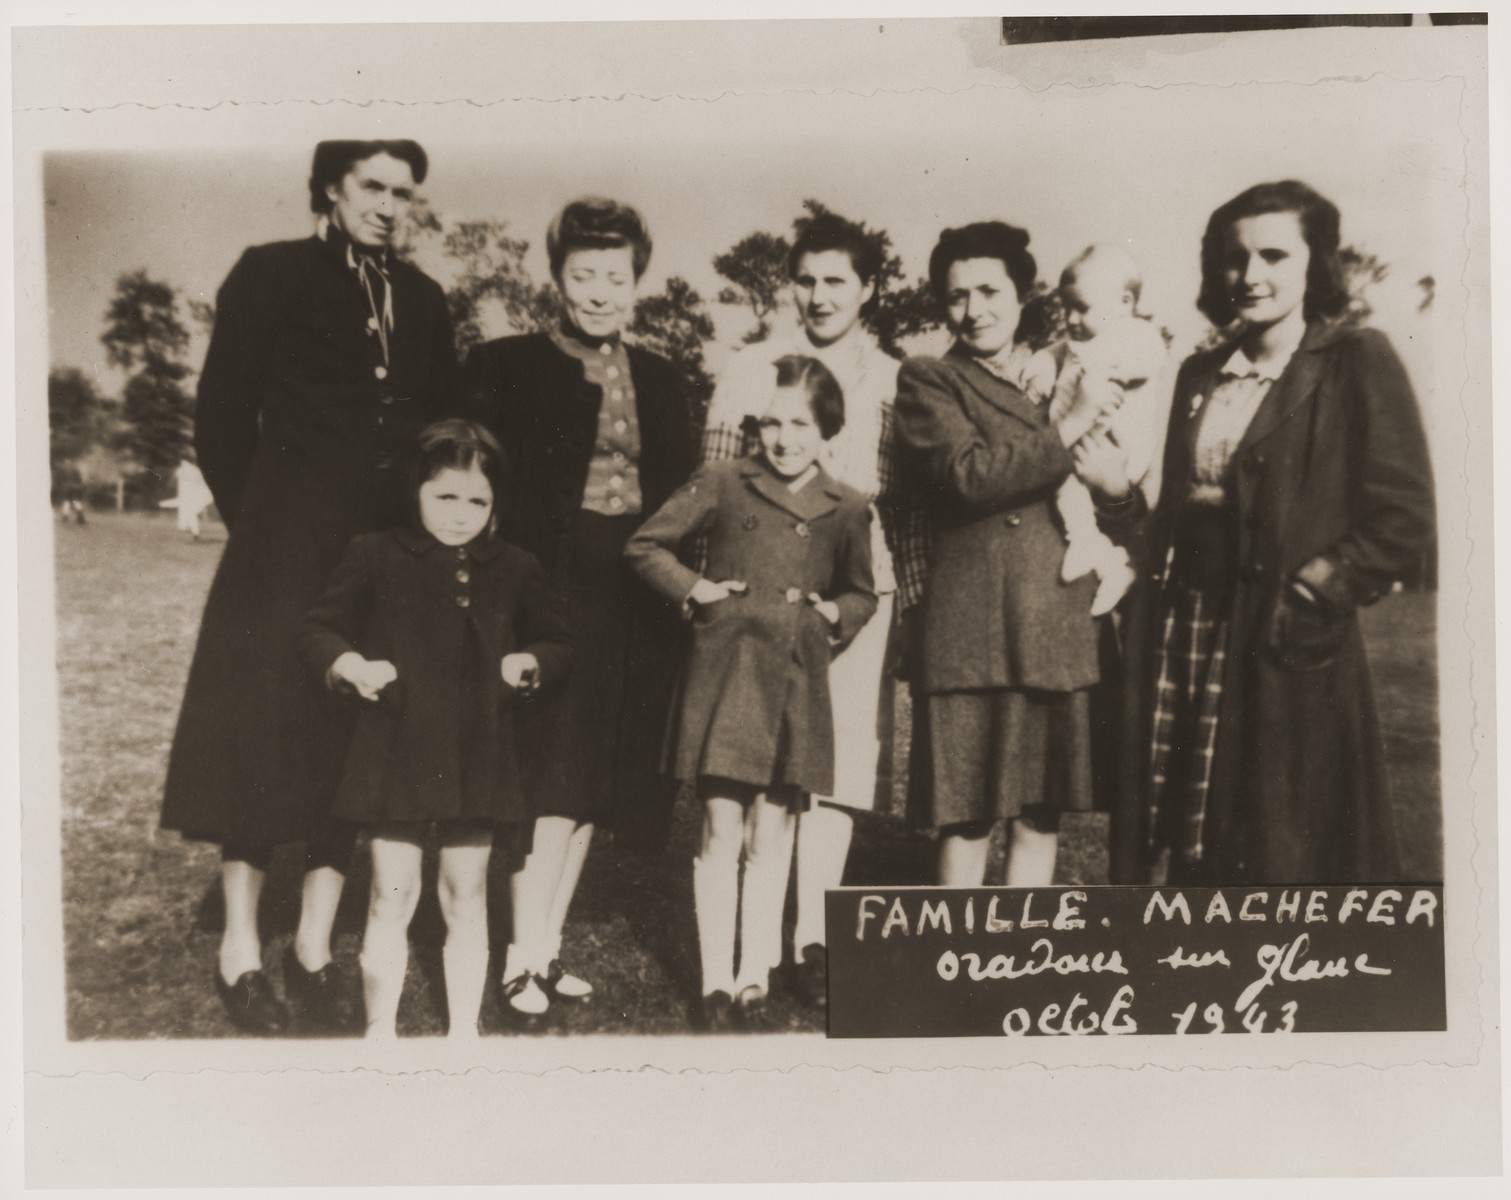 The Machefer family poses together in Oradour.  

All of the people pictured here, except for the father, were killed by the SS during the June 10, 1944 massacre.